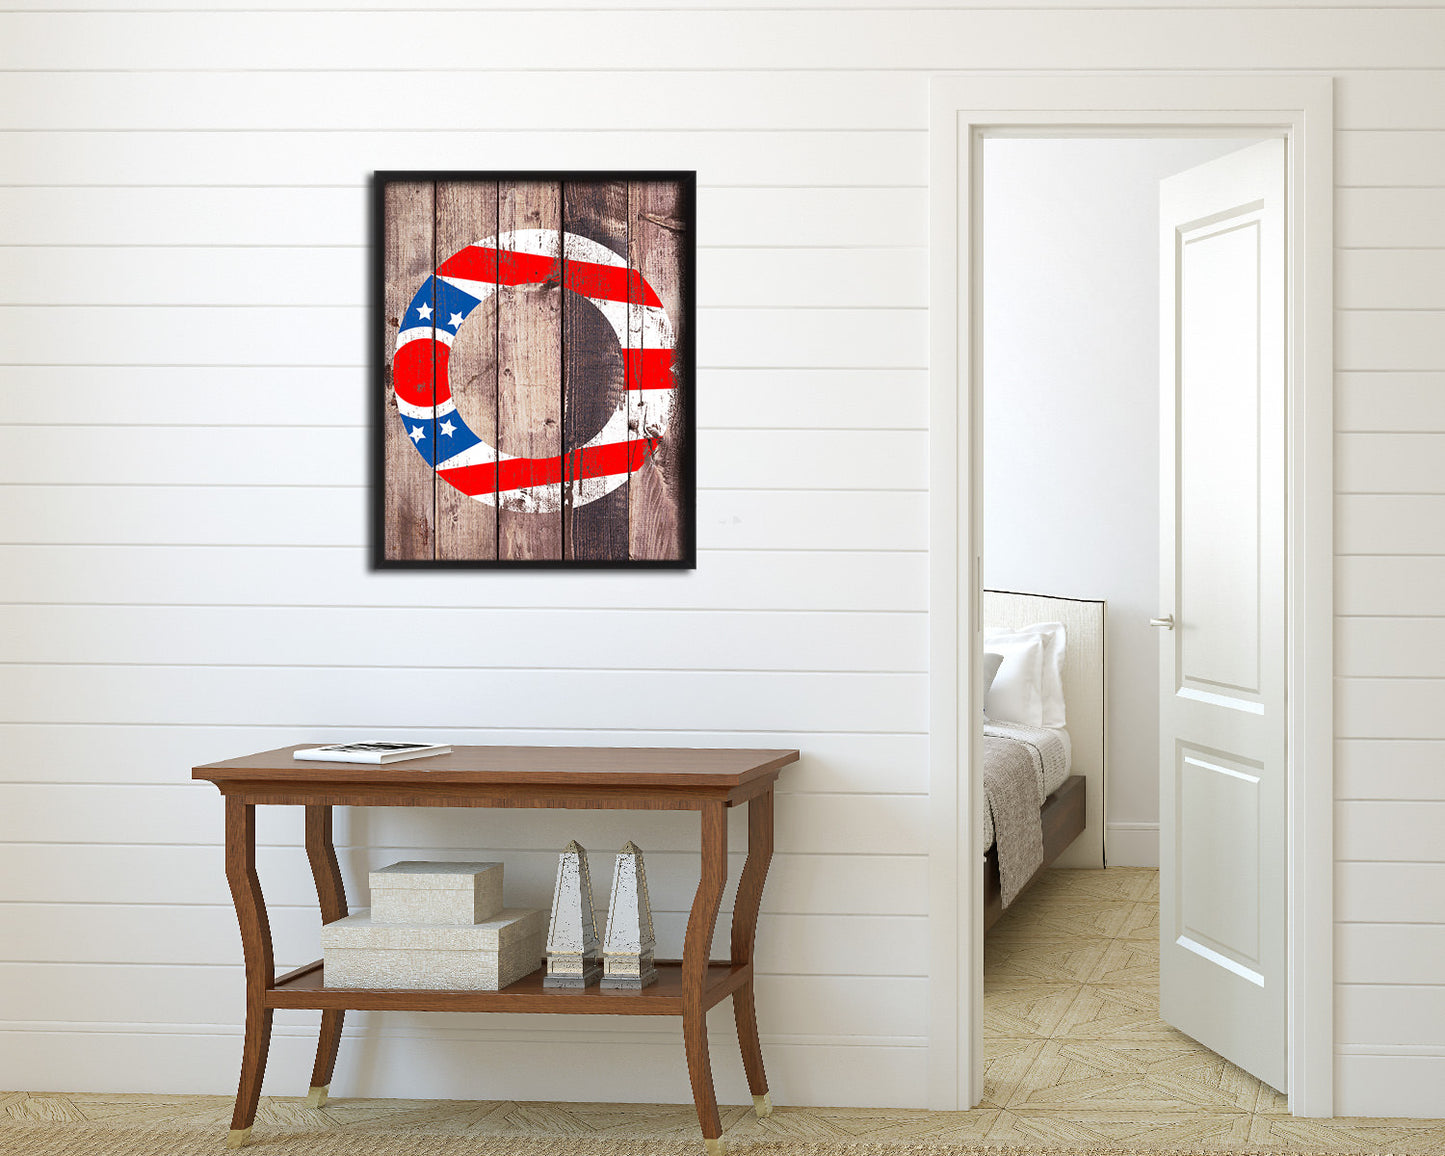 Ohio State Initial Flag Wood Framed Paper Print Decor Wall Art Gifts, Wood